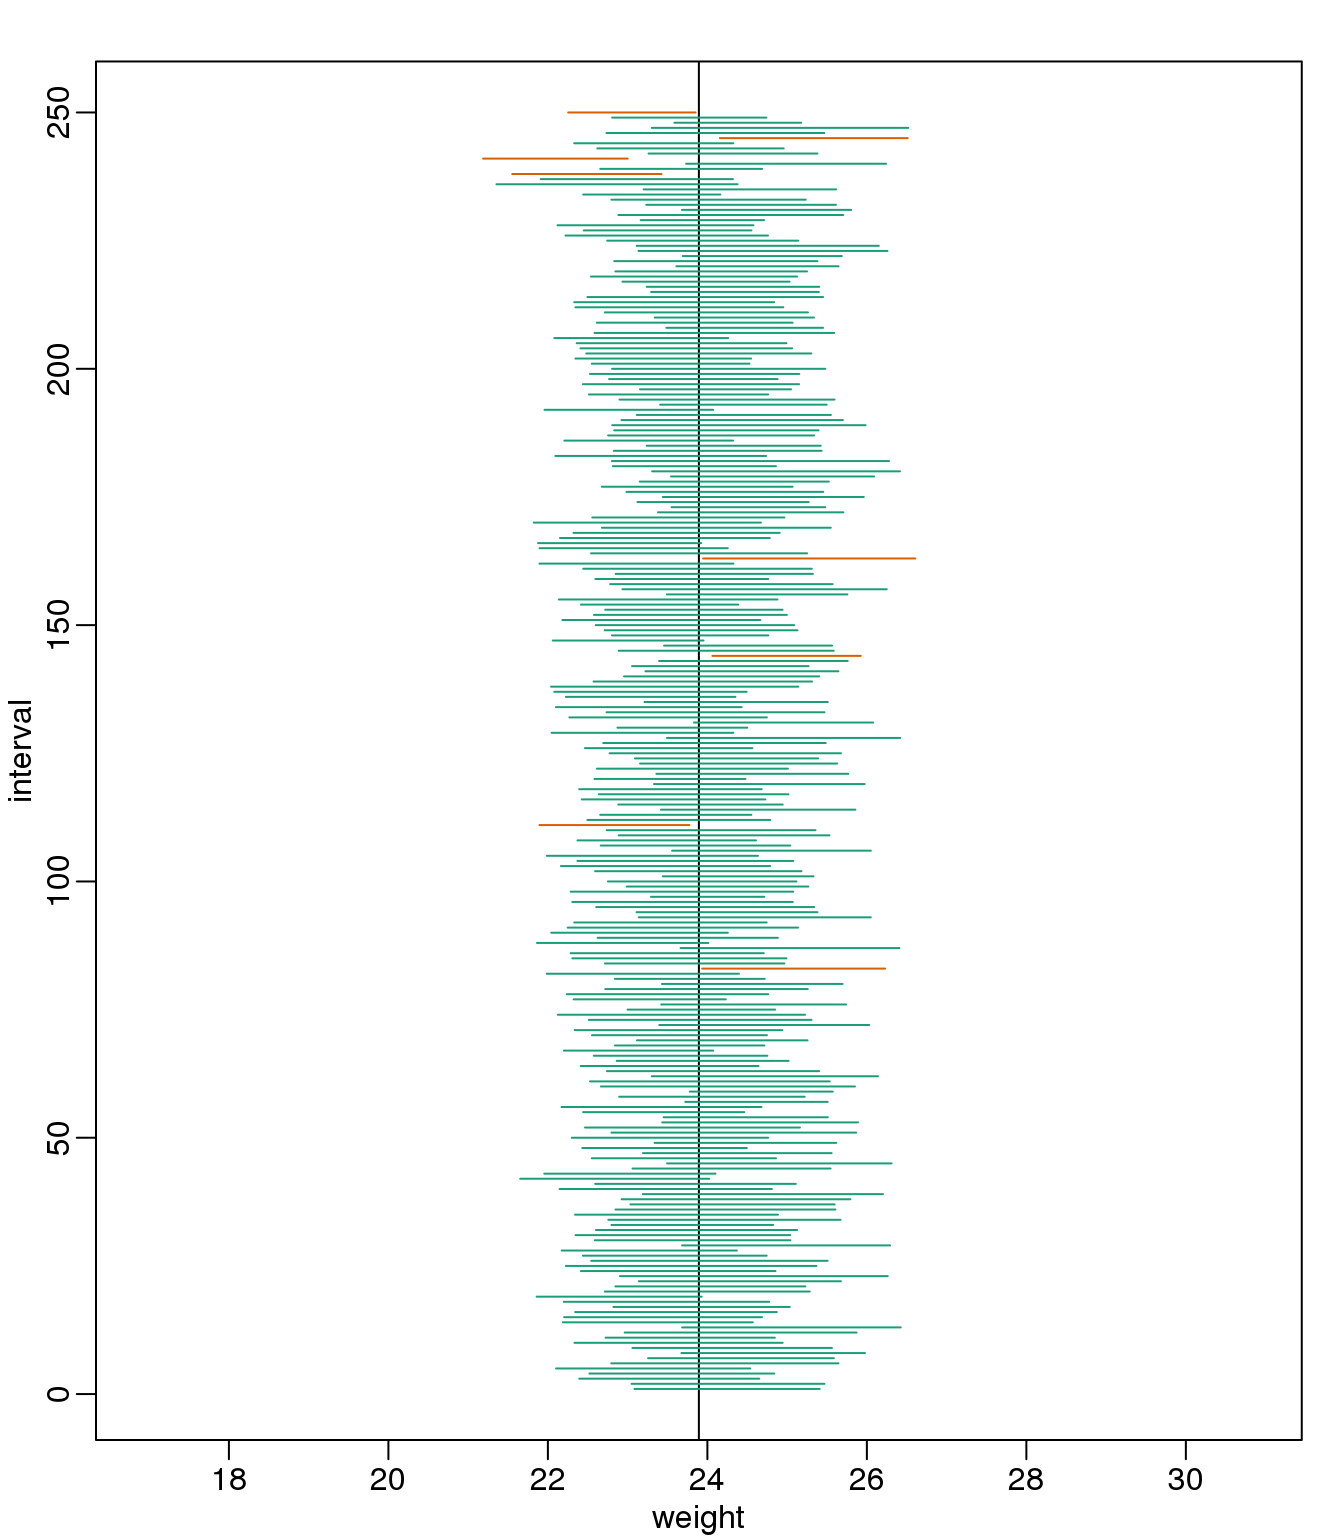 We show 250 random realizations of 95% confidence intervals. The color denotes if the interval fell on the parameter or not.